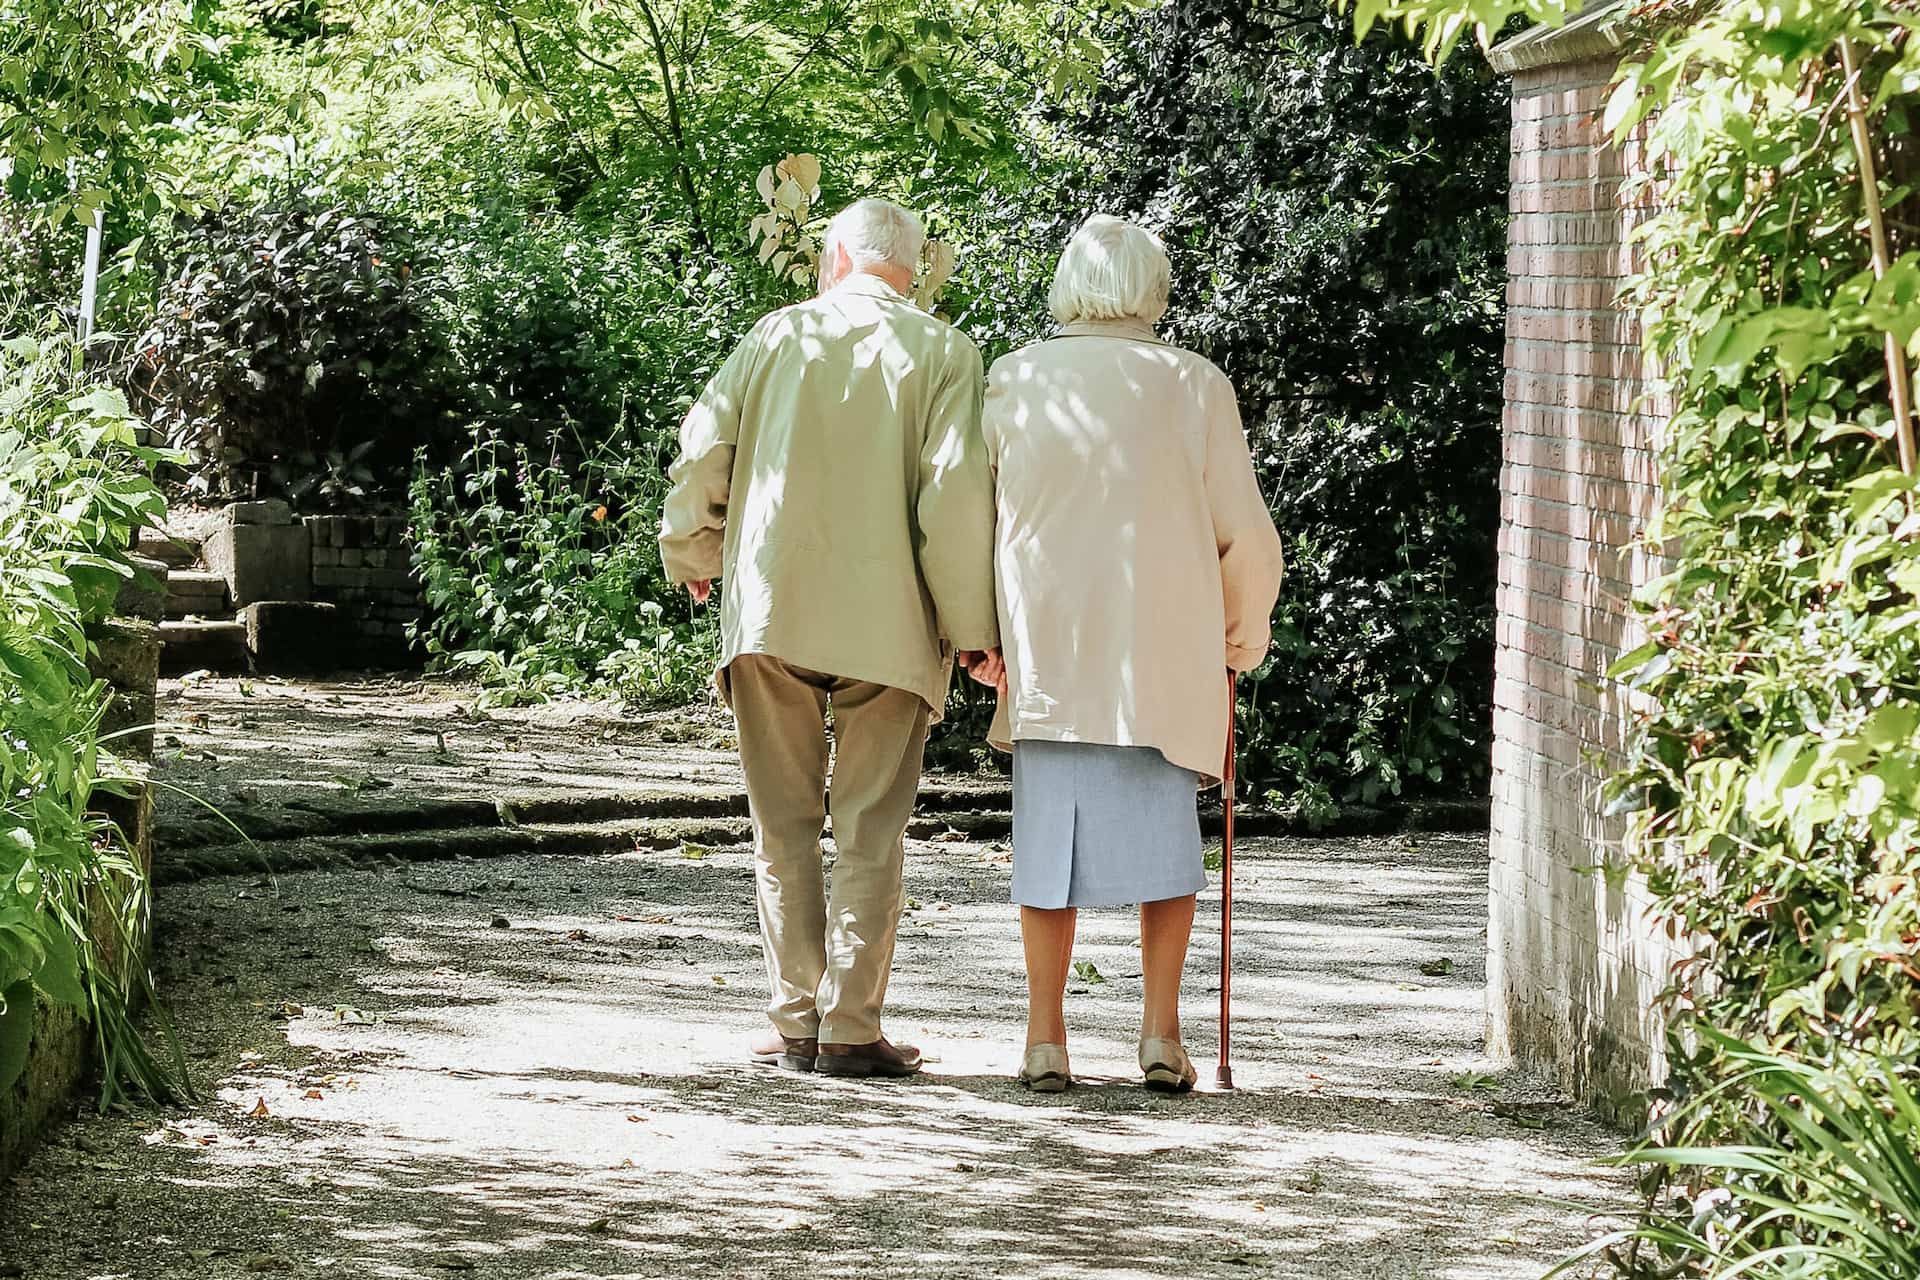 Seen from behind, two elderly people walk down a lane. 